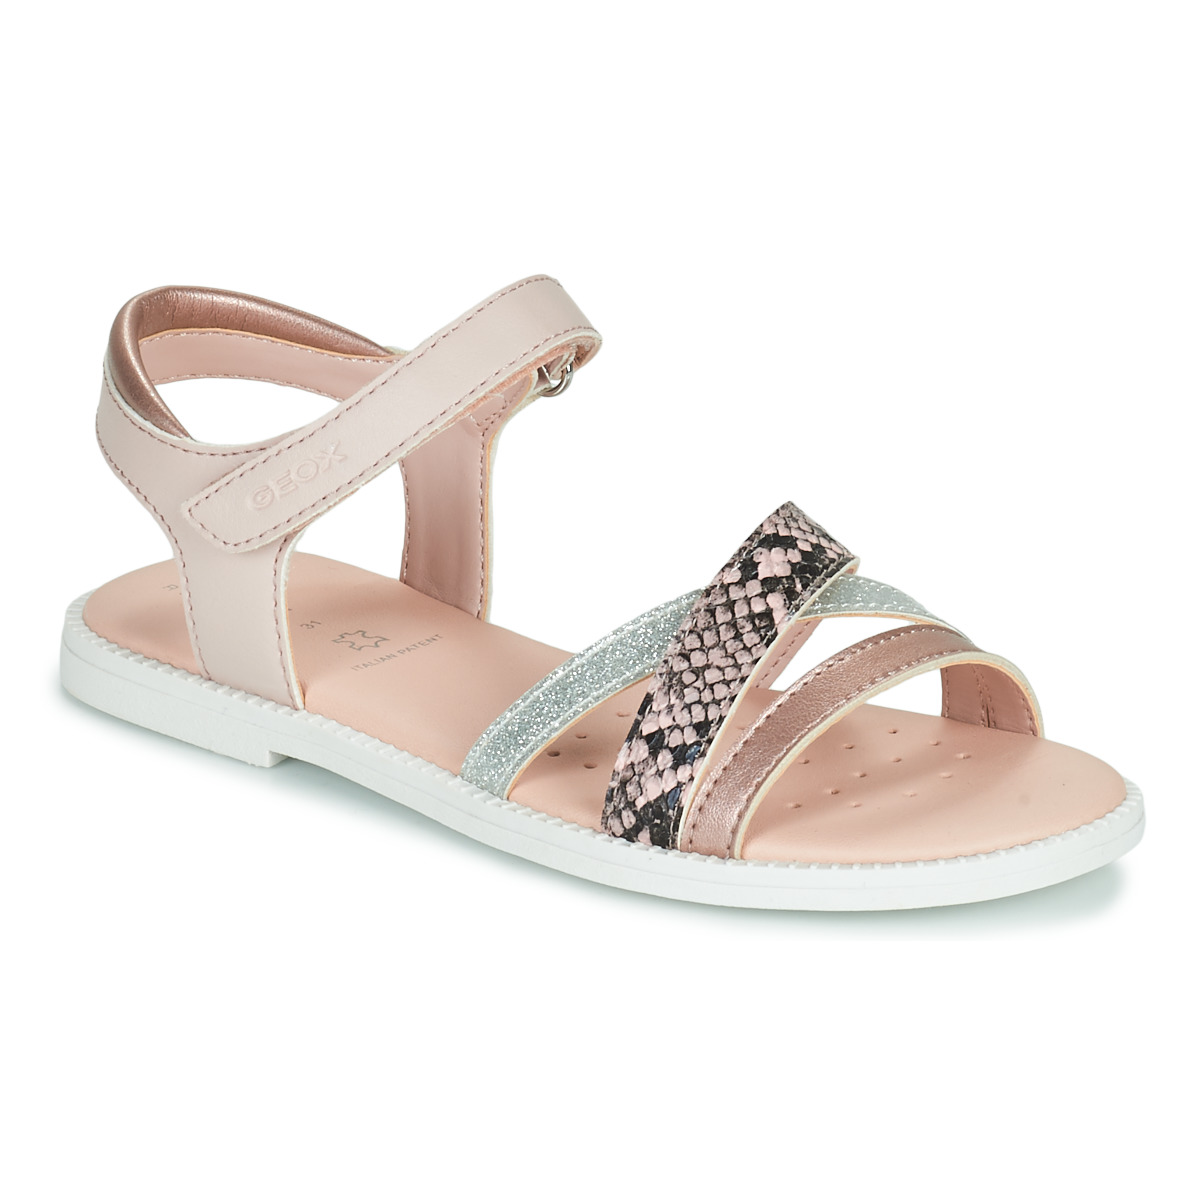 Geox J Sandal Karly Girl F Bout Ouvert Fille